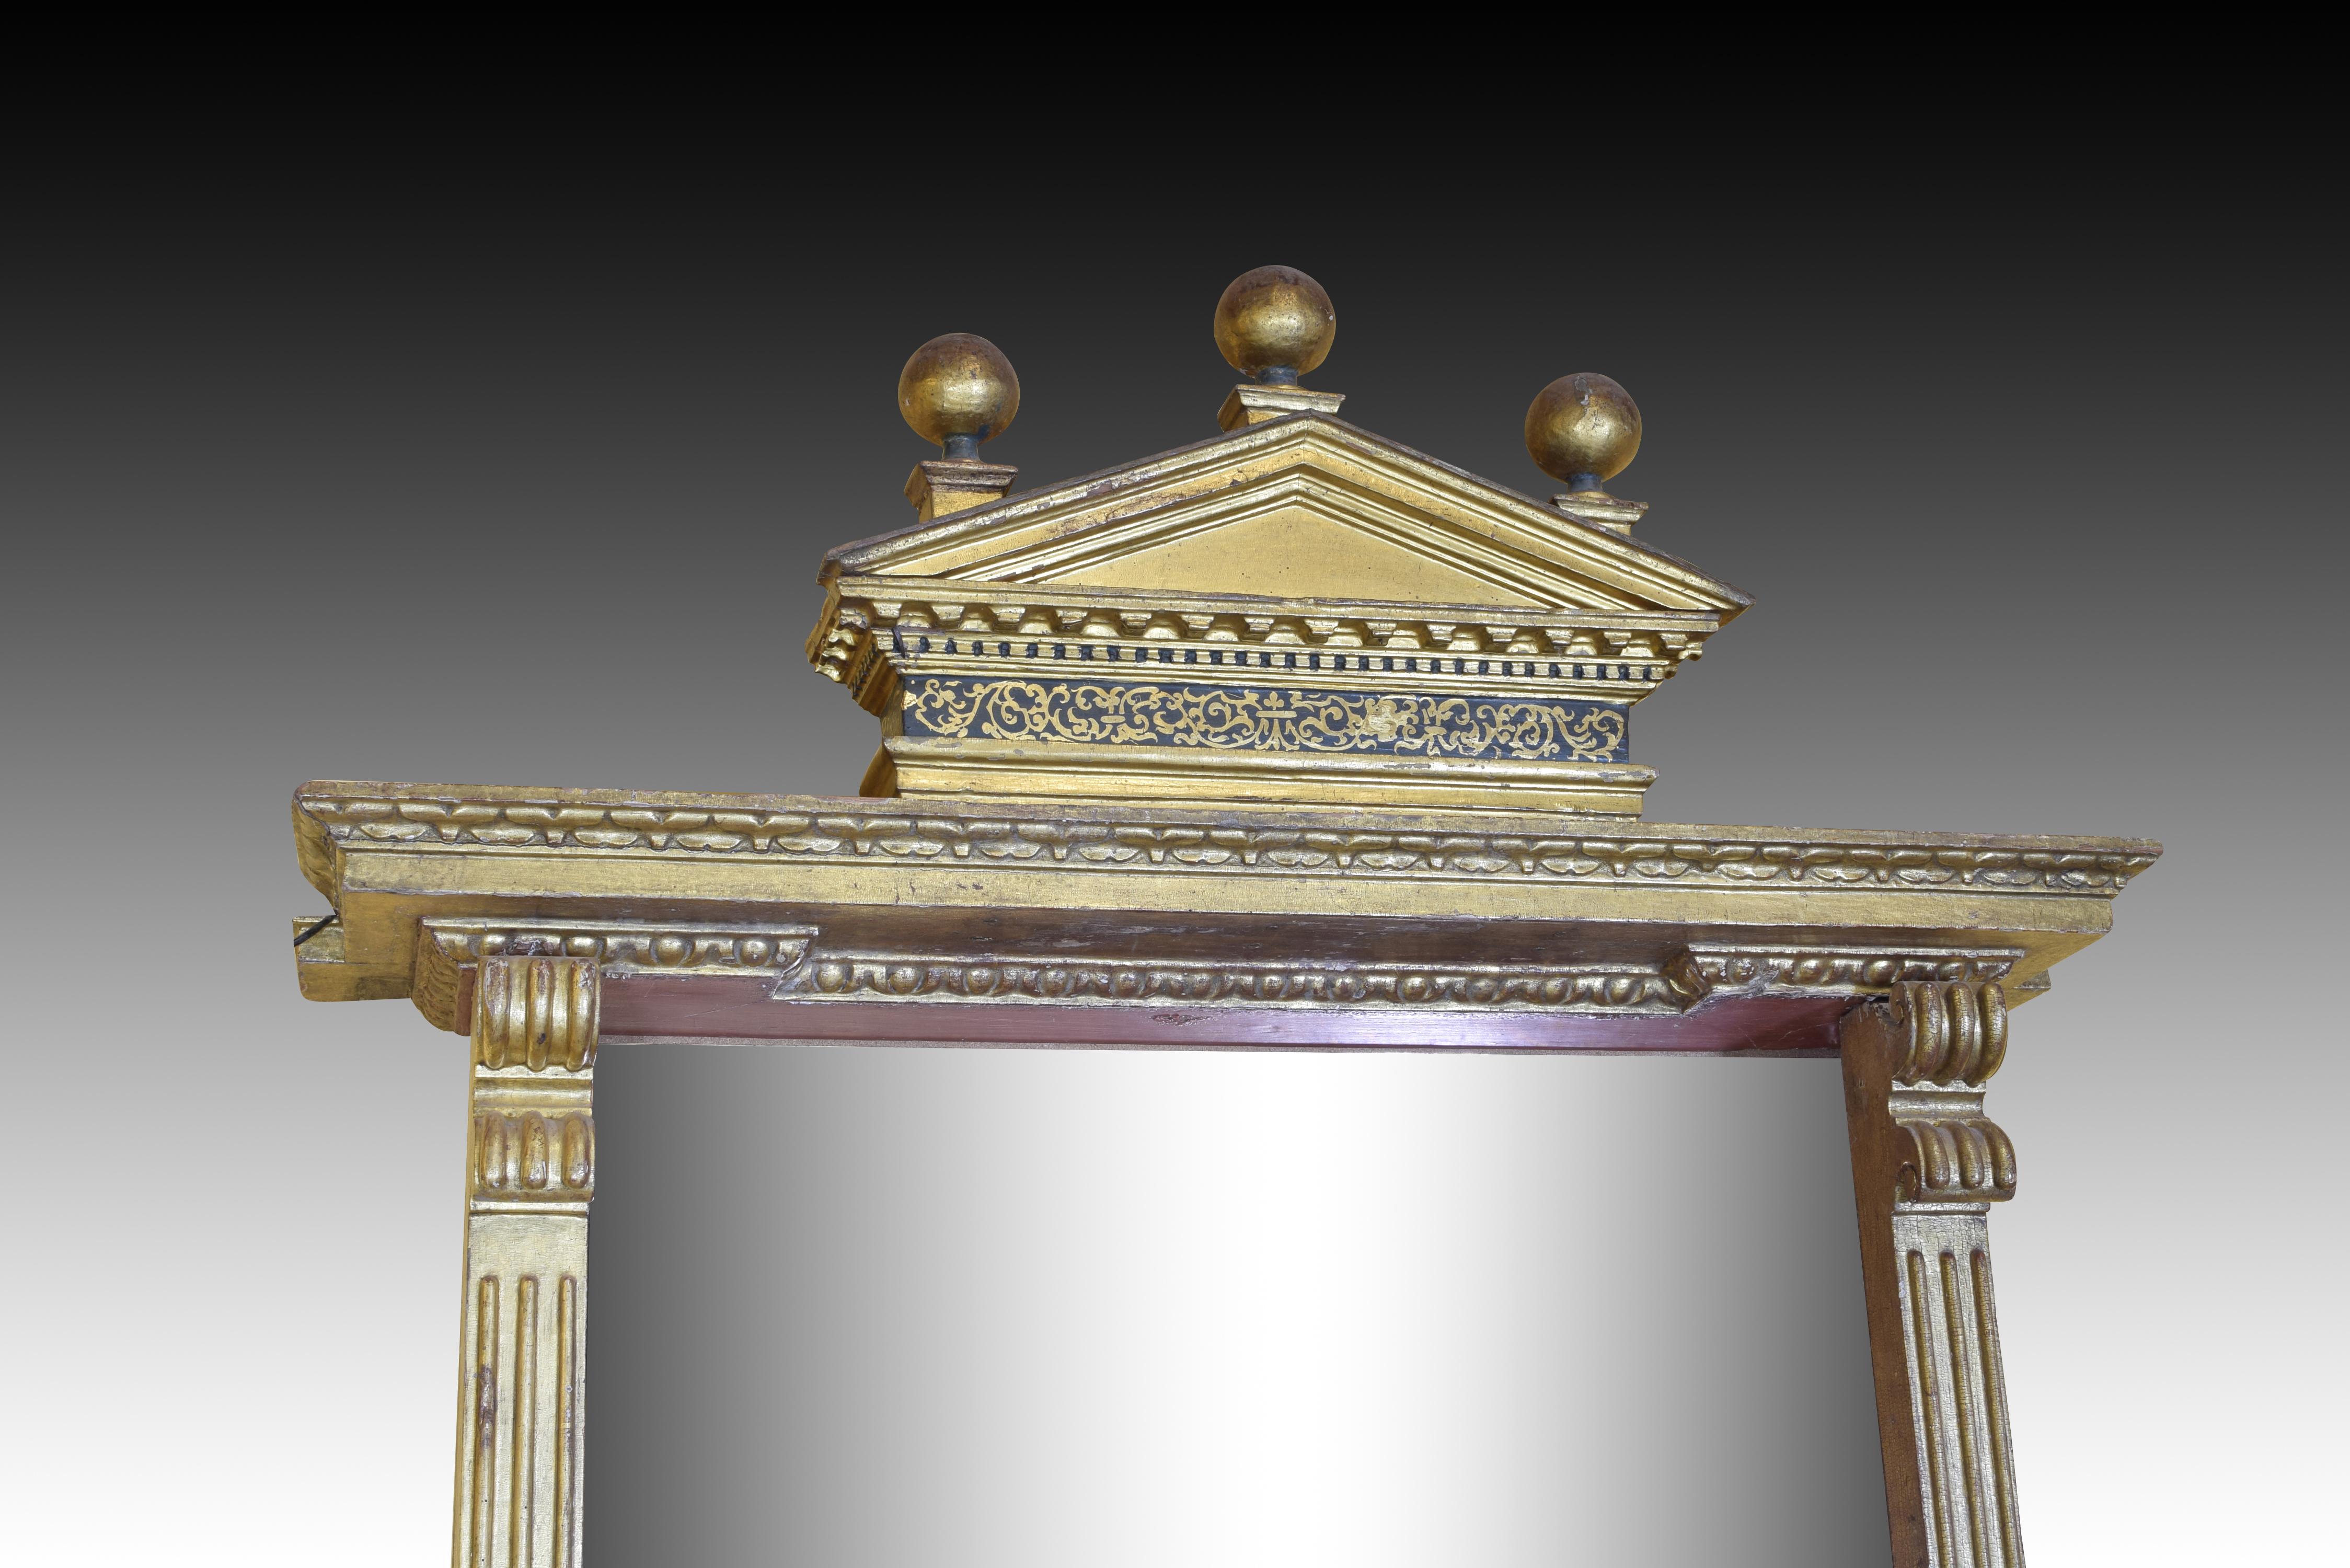 Carved wooden frame, polychromed and gilded made with different elements of marked Renaissance influence, resulting in an architectural composition with staggered base, two ribbed pilasters with volutes on the sides and an upper top formed by